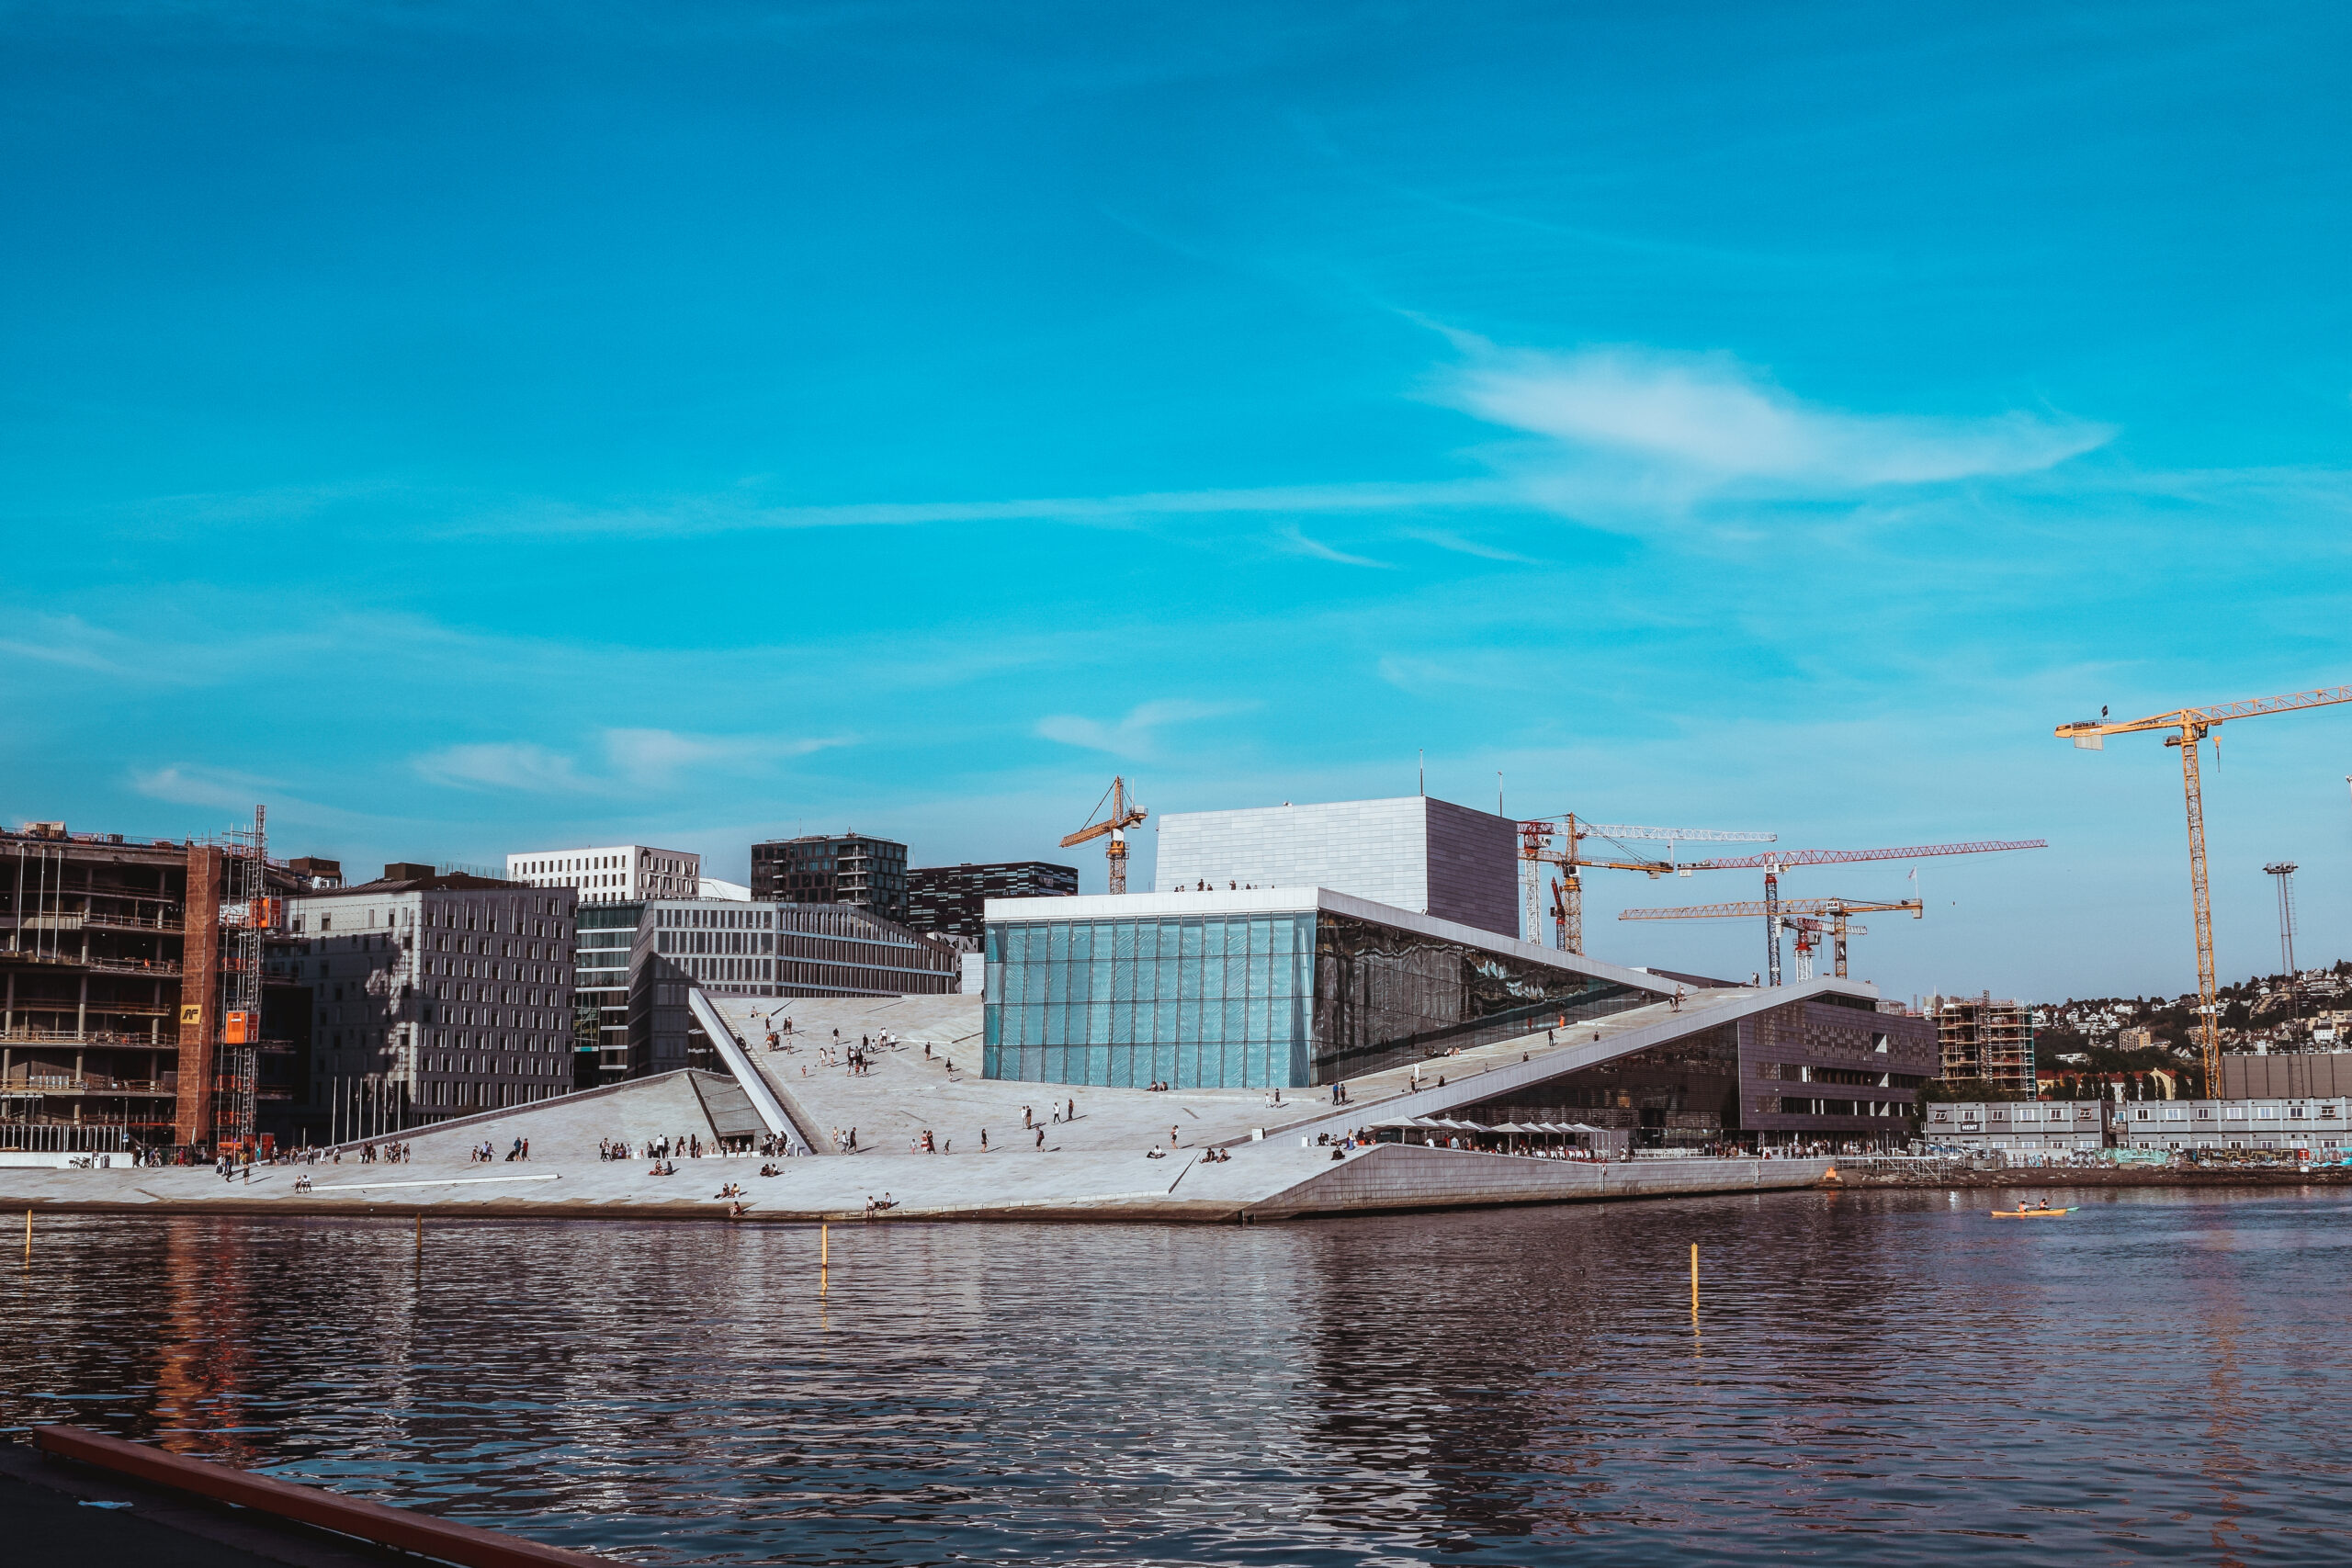 How-To-Travel-In-Norway-24-Hours-In-Oslo-On-A-Budget-travel-blog-svadore Top Things to Do in One Day in Oslo in May opera house